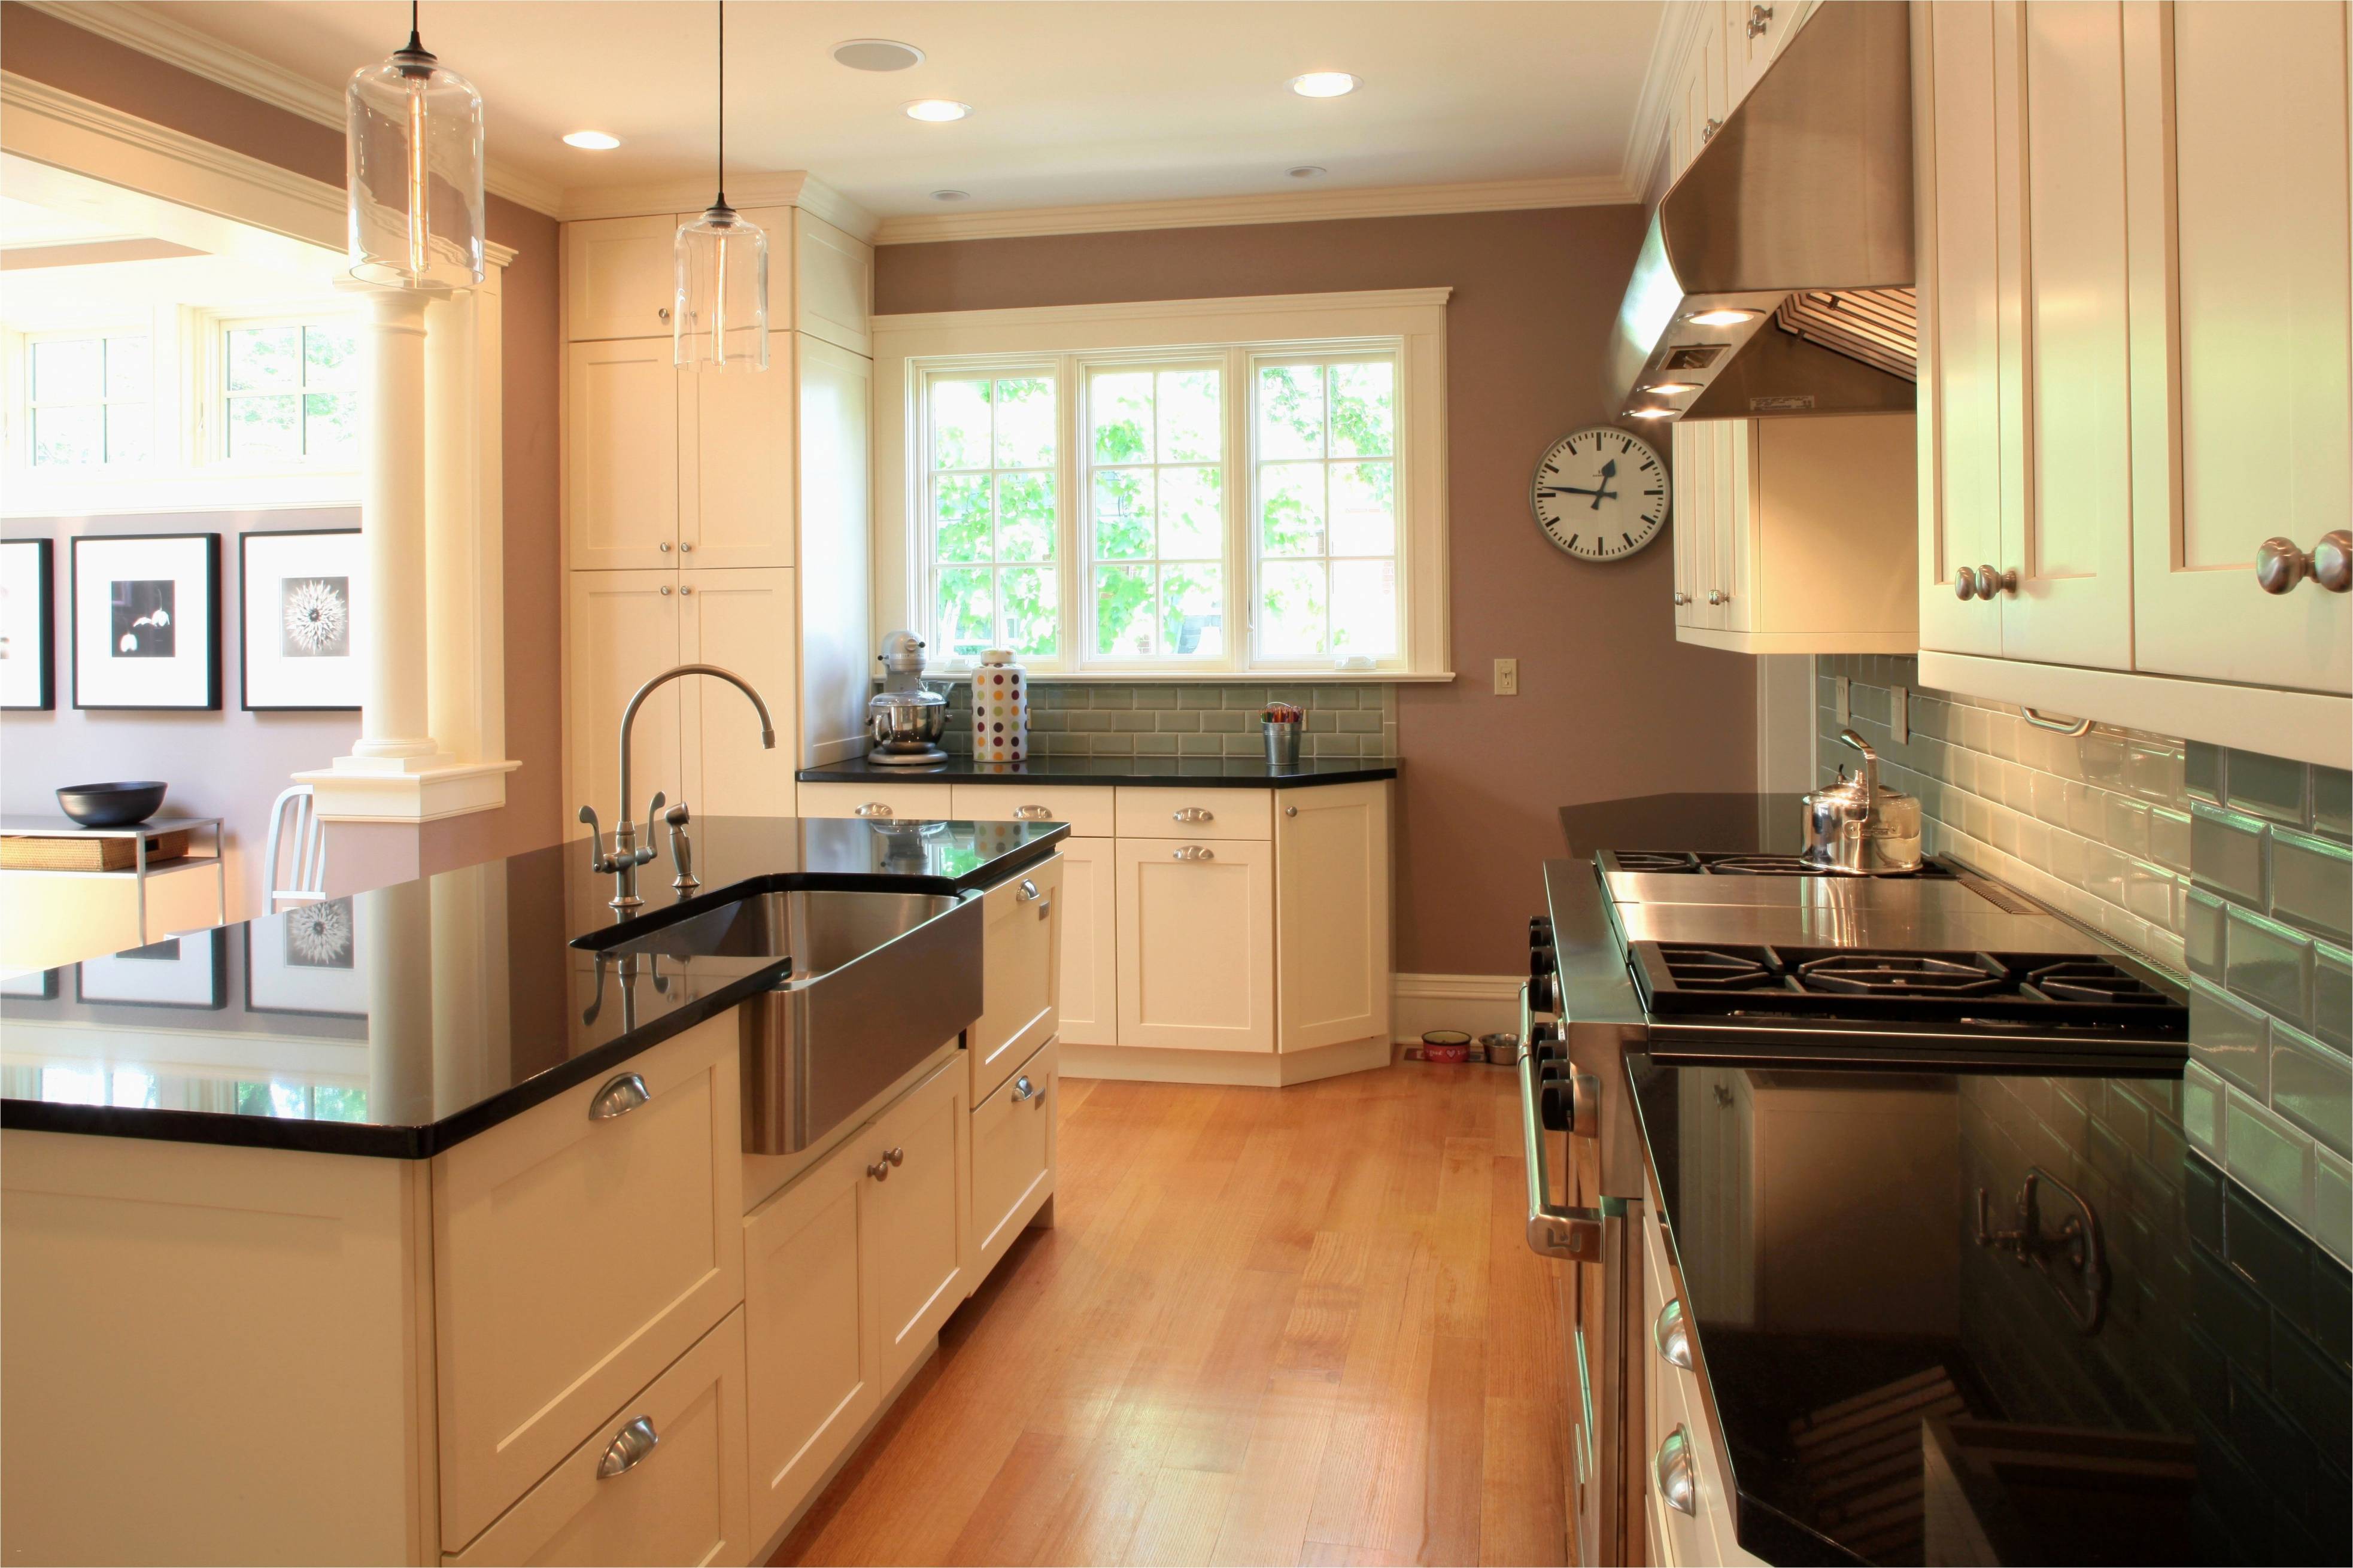 Kitchen Color Ideas With White Cabinets Freshsdg